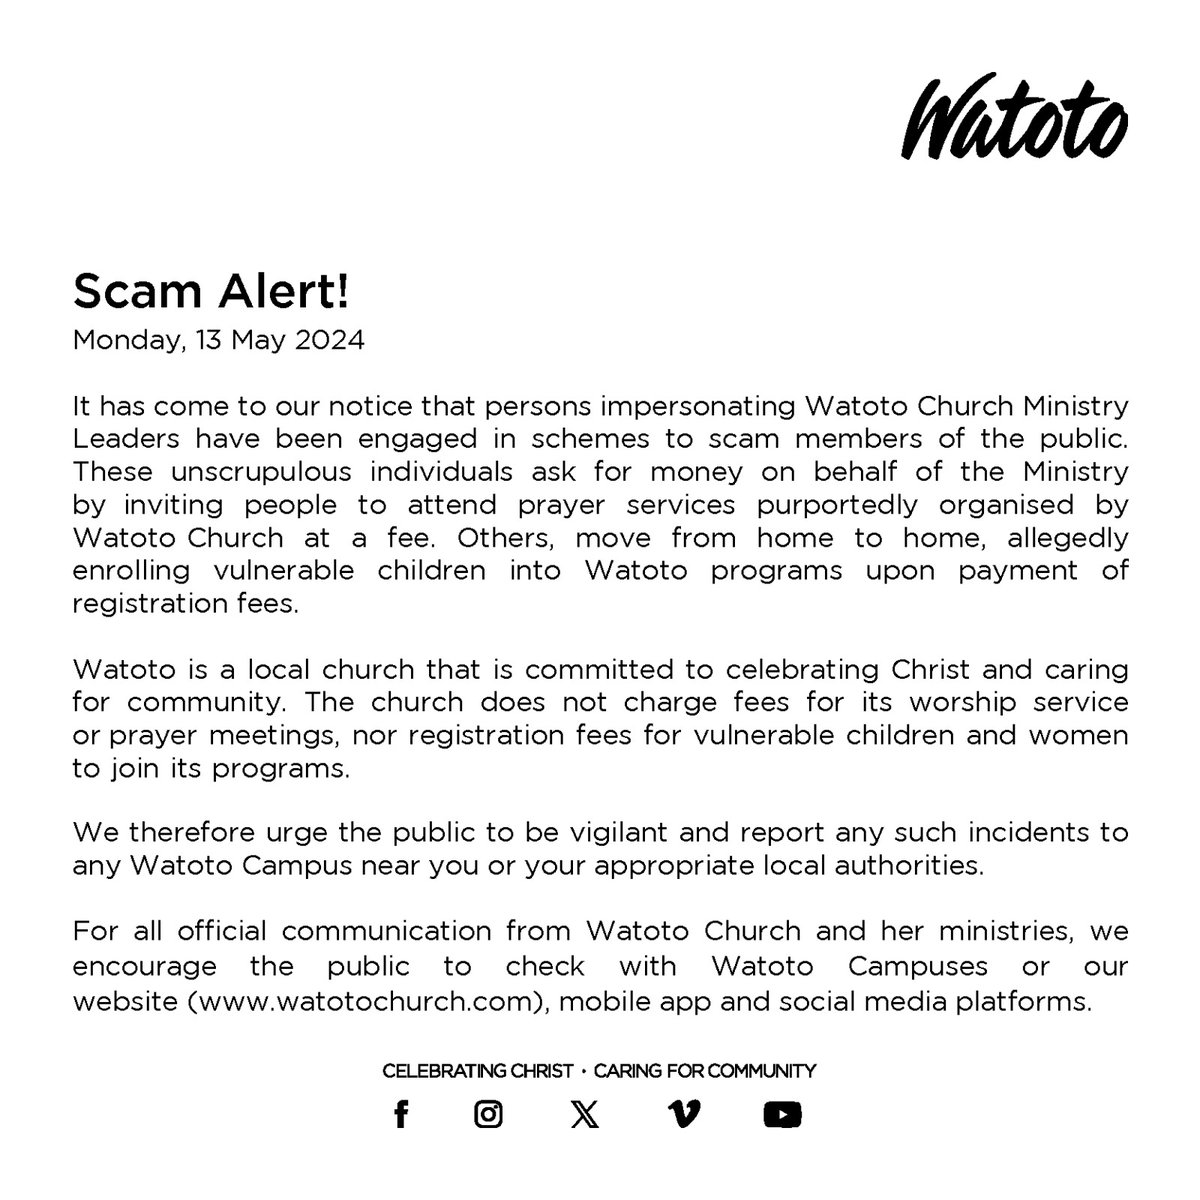 SCAM ALERT It has come to our notice that persons impersonating Watoto Church Ministry Leaders have been engaged in schemes to scam members of the public. We urge the public to be vigilant and report any such incidents to a Watoto Campus near you or your appropriate local